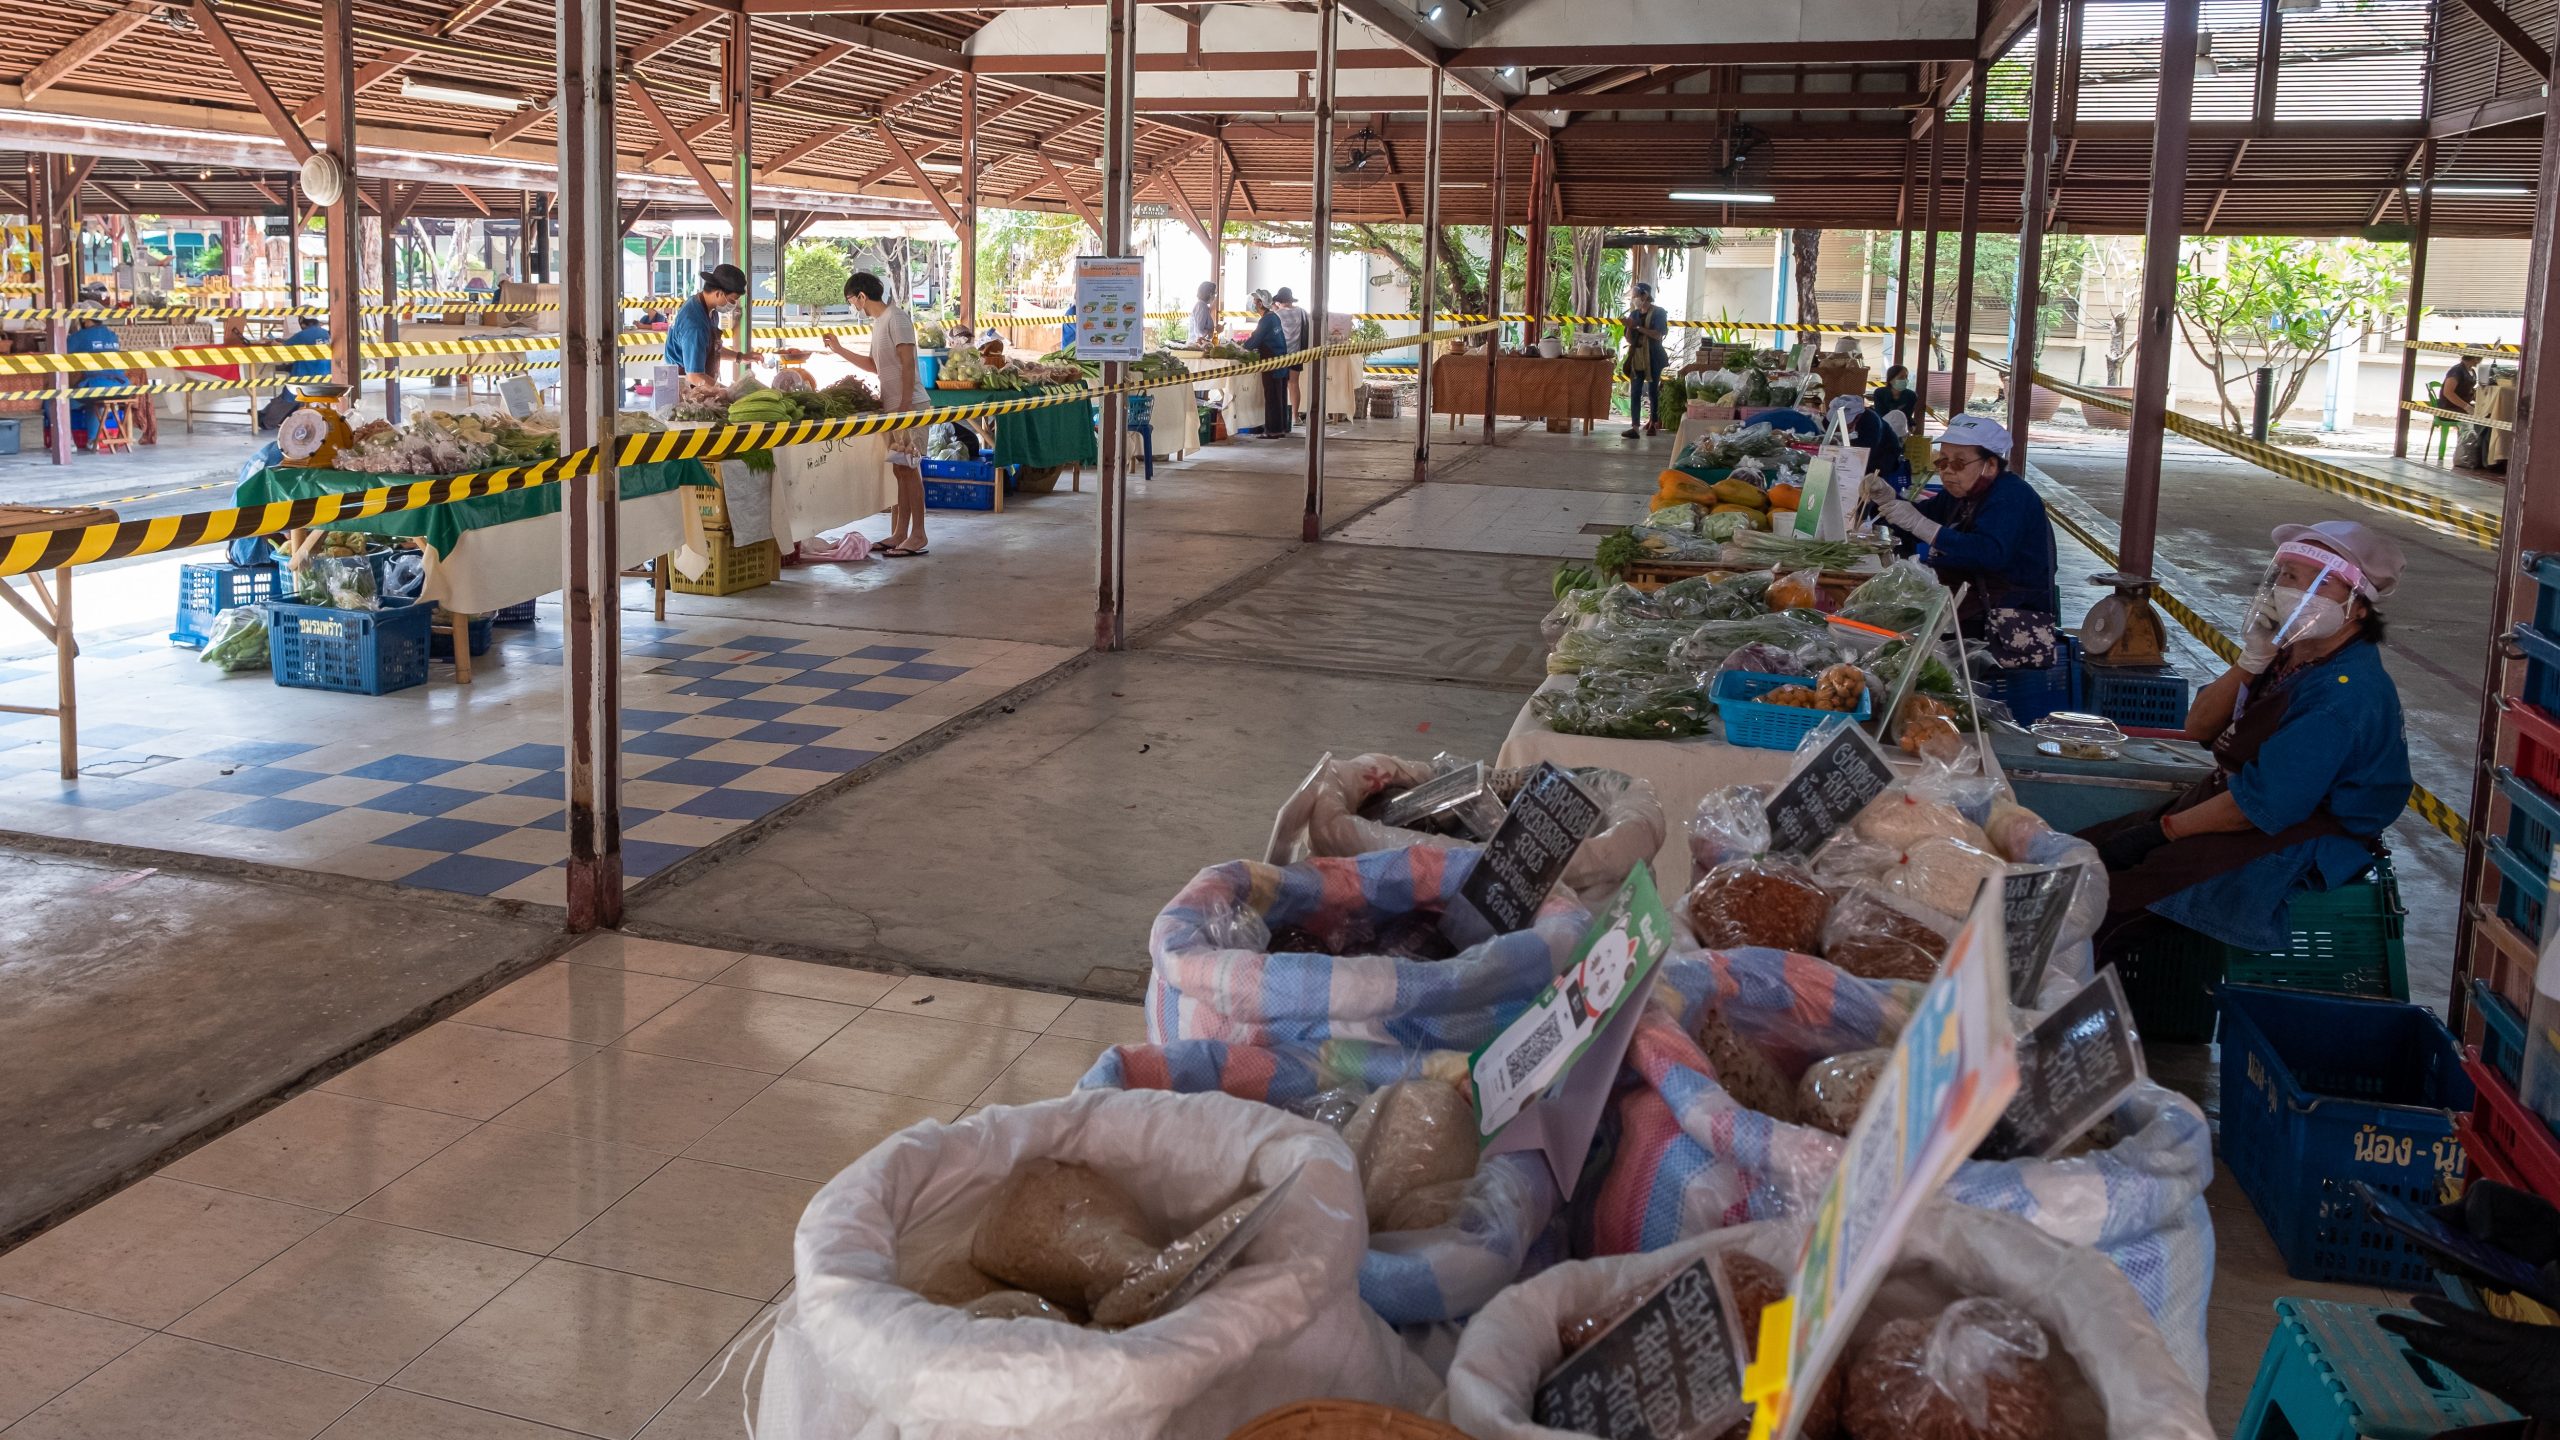 Newly re-opened food market in Chiang Mai, Thailandwith social distancing restrictions due to Covid 19 pandemic and lock down